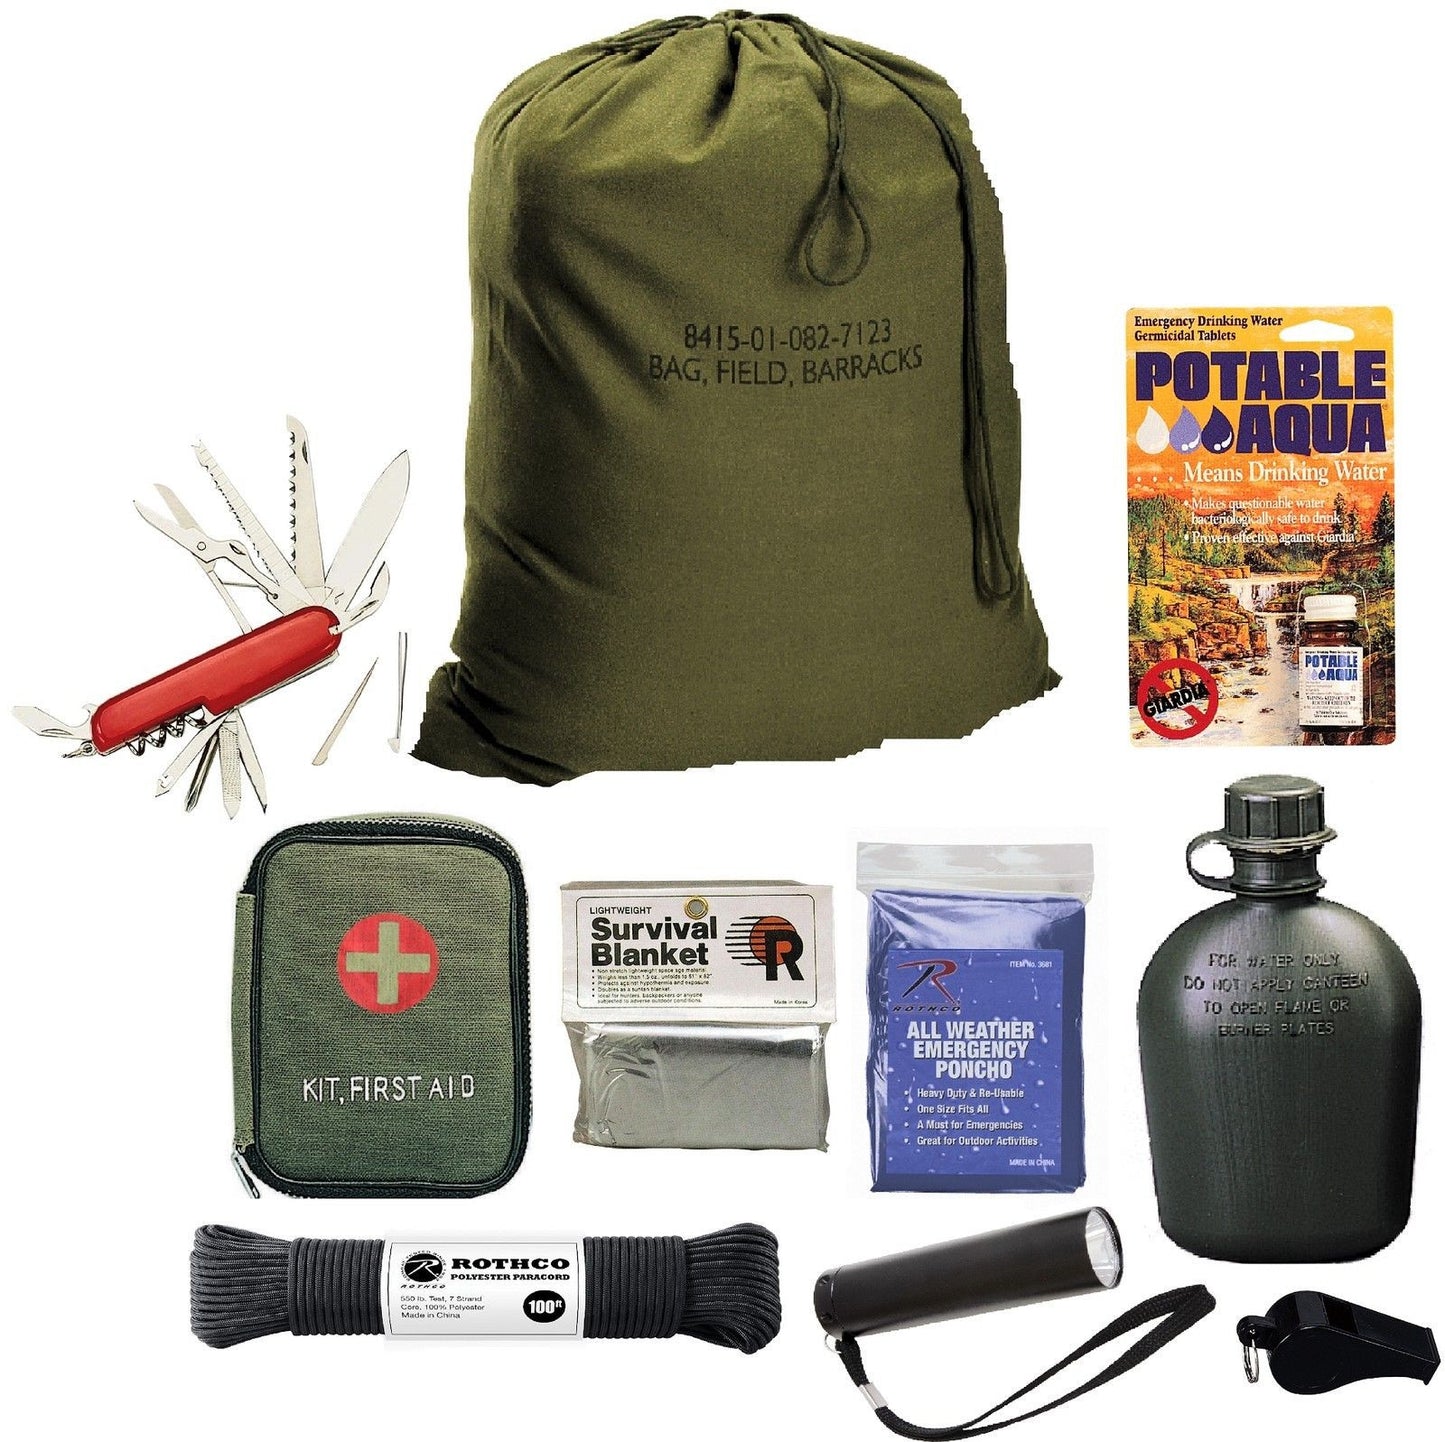 72 Hour Emergency Disaster Survival Kit - Zombie Apocalypse Prepper Bug Out Bag